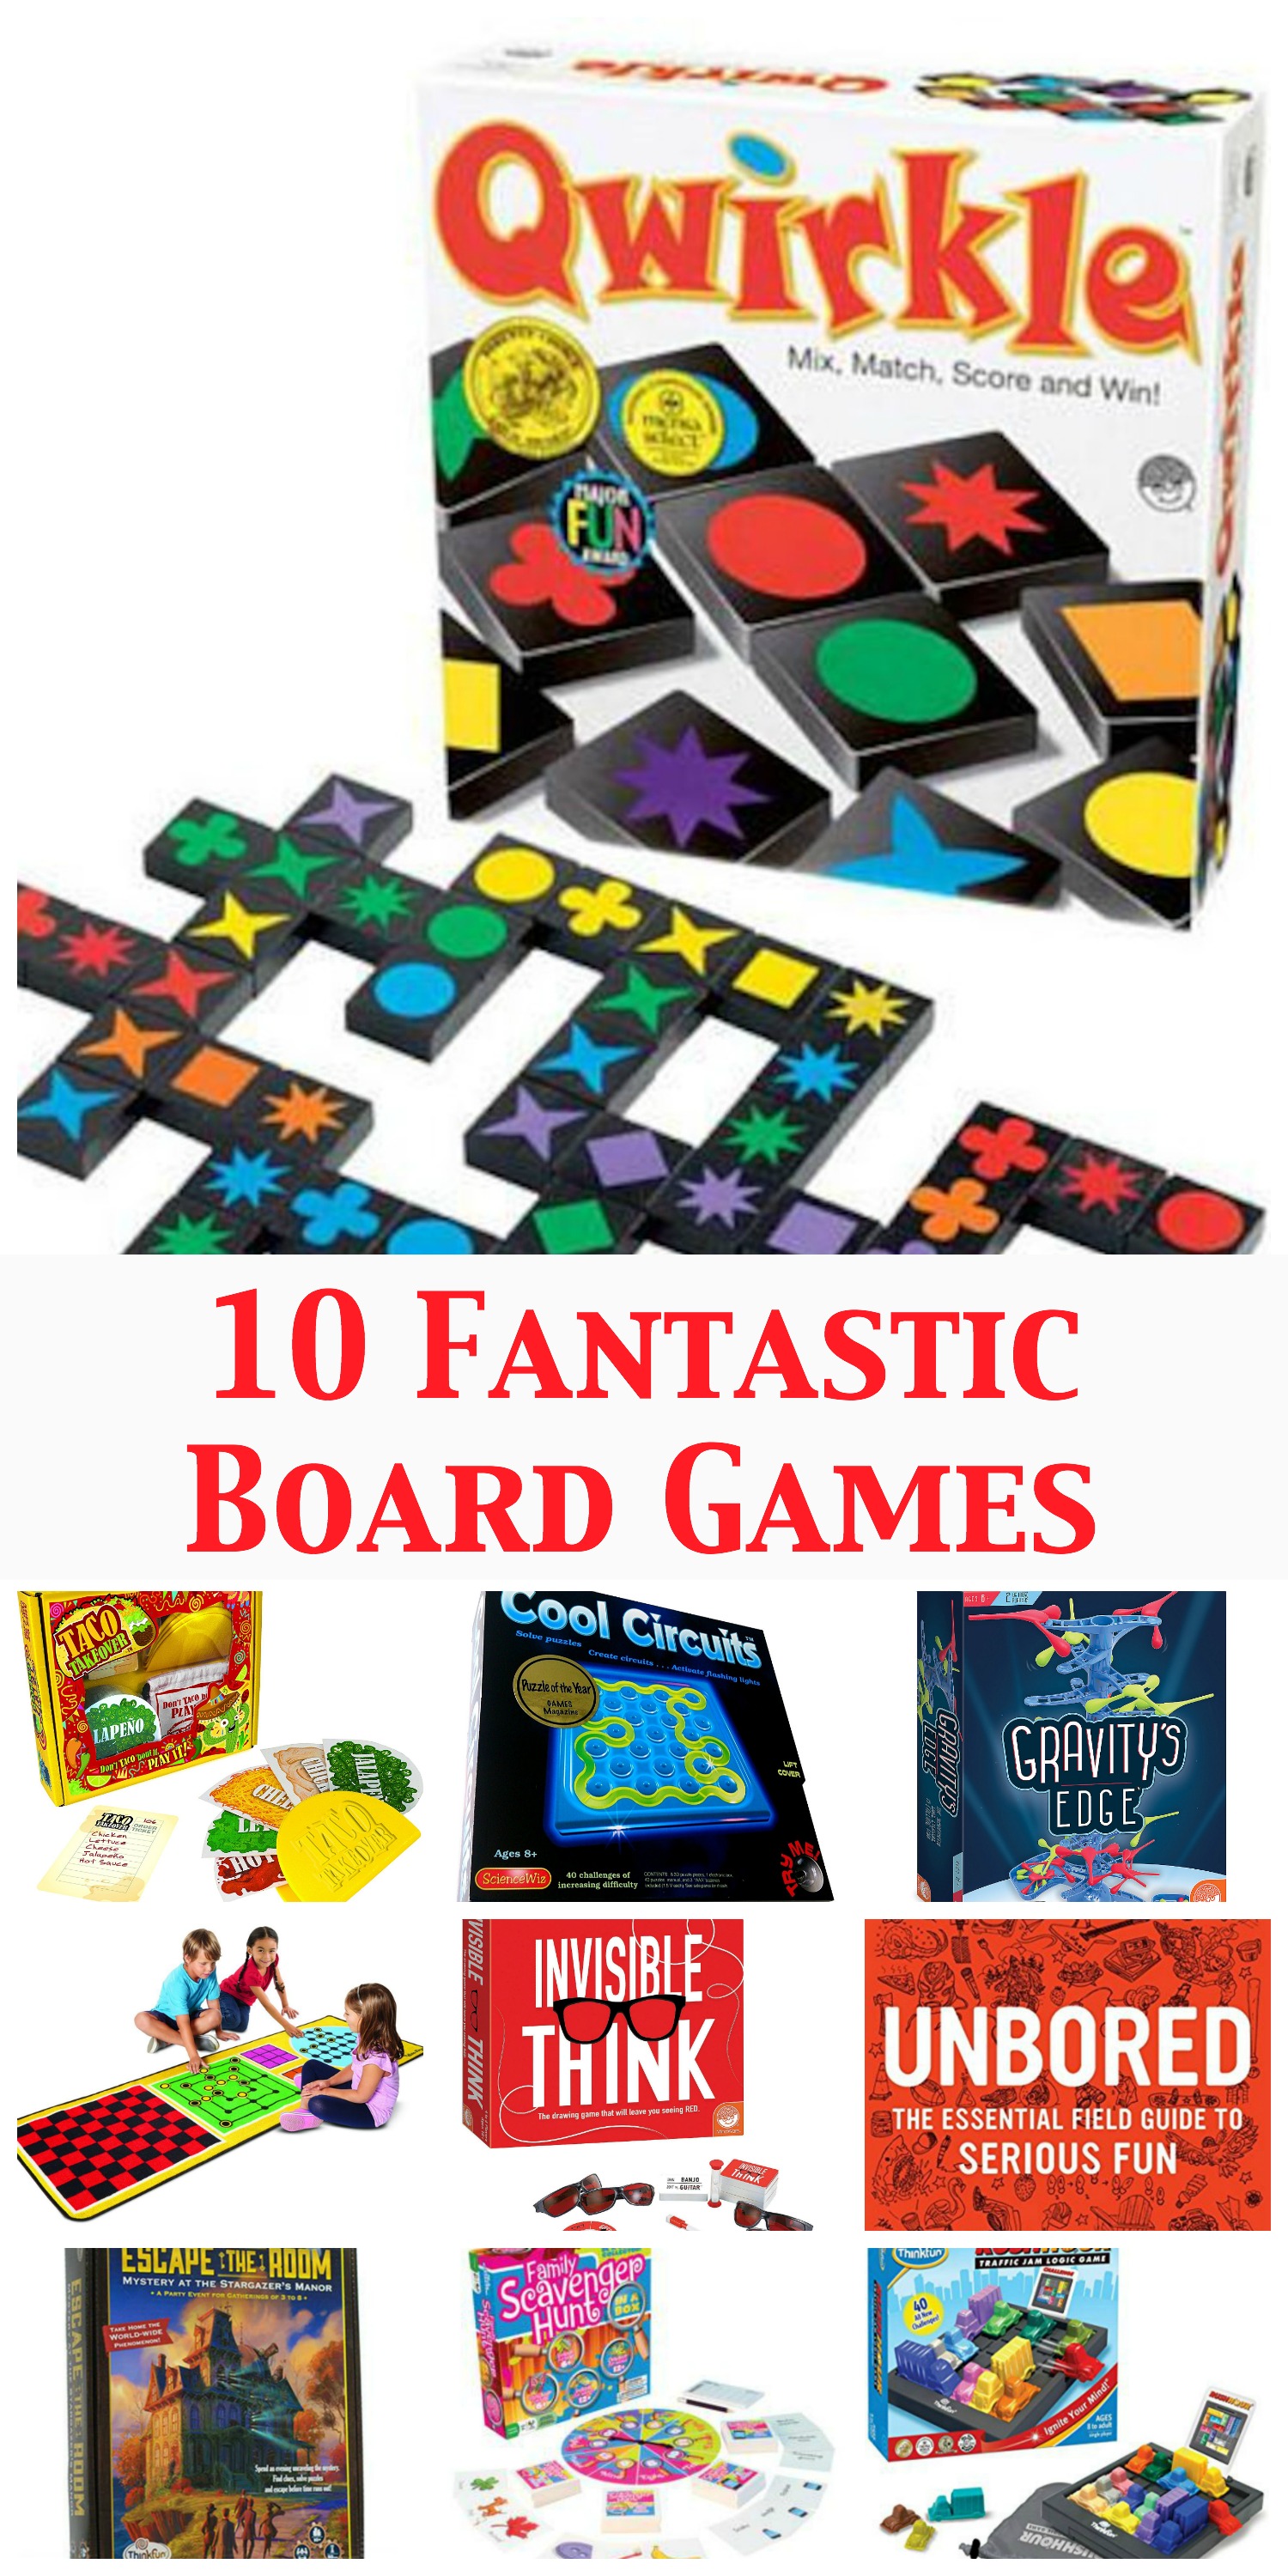 Everyday Party Magazine Ten Fantastic Board Game Gifts 